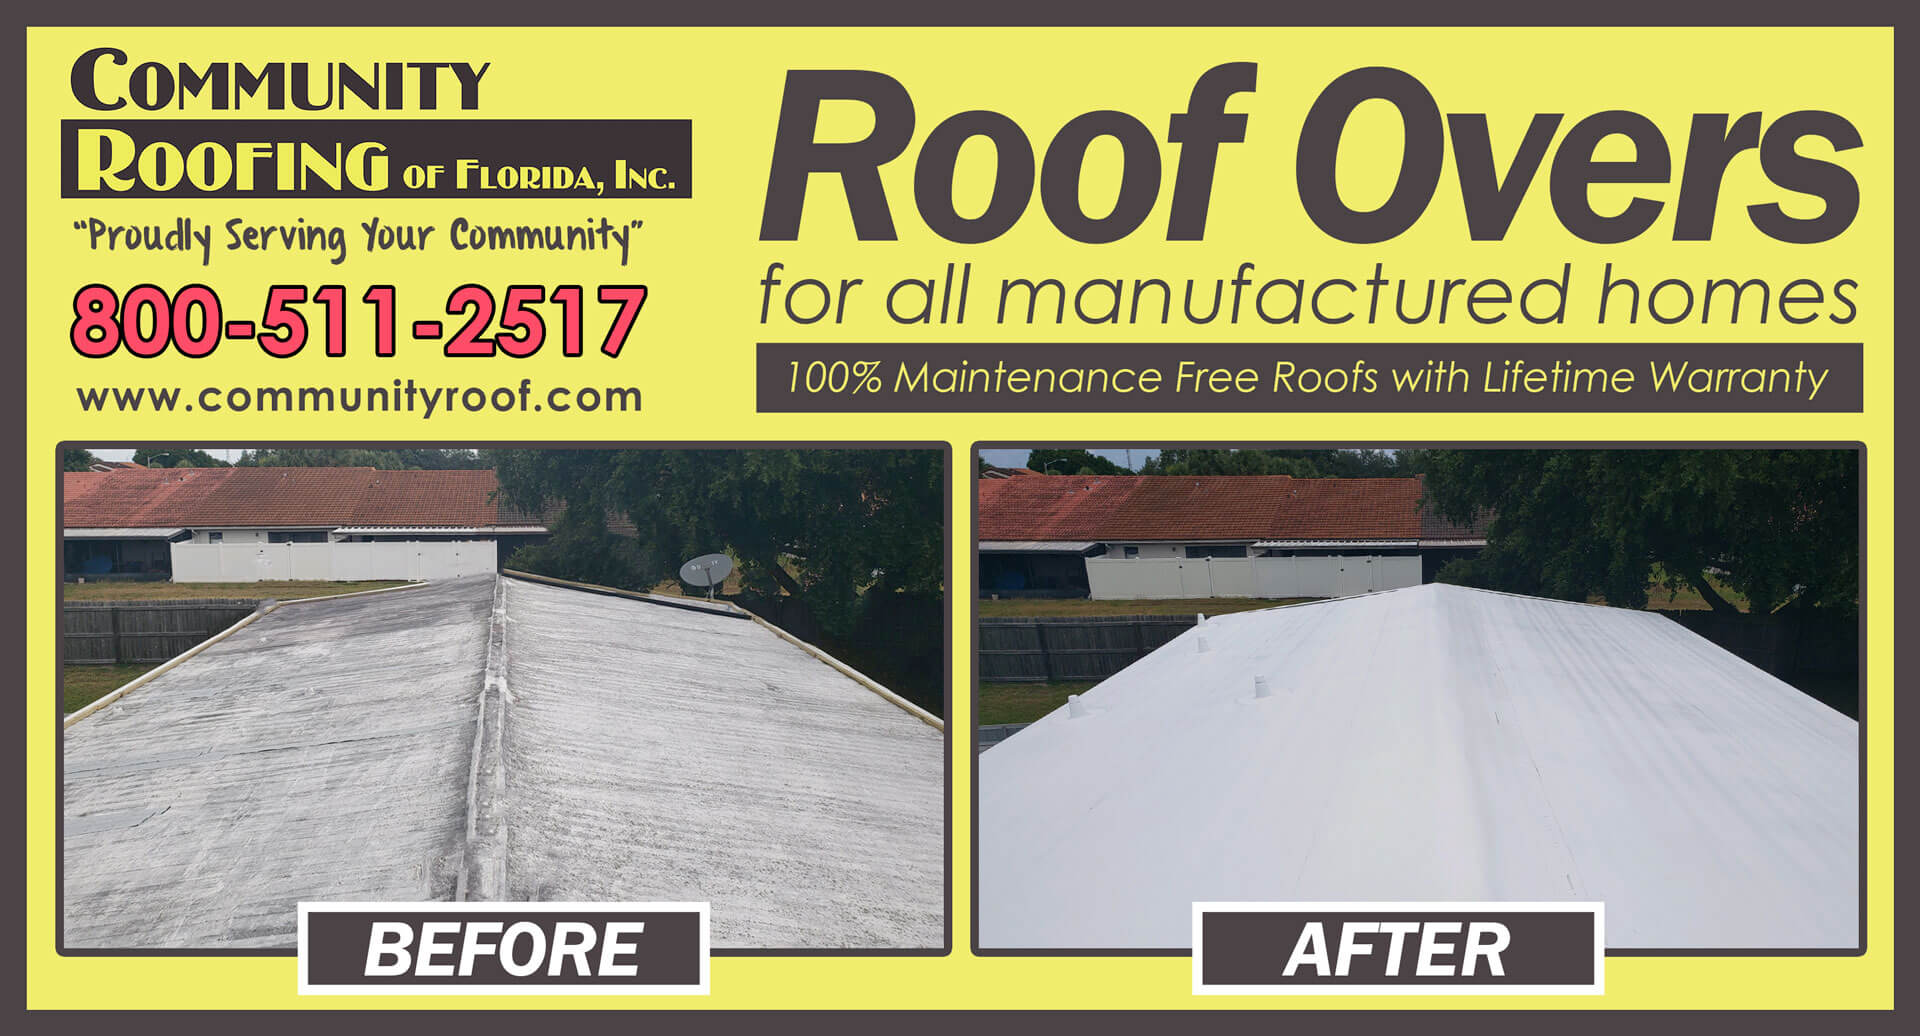 Mobile Home Roof Over Largo Florida